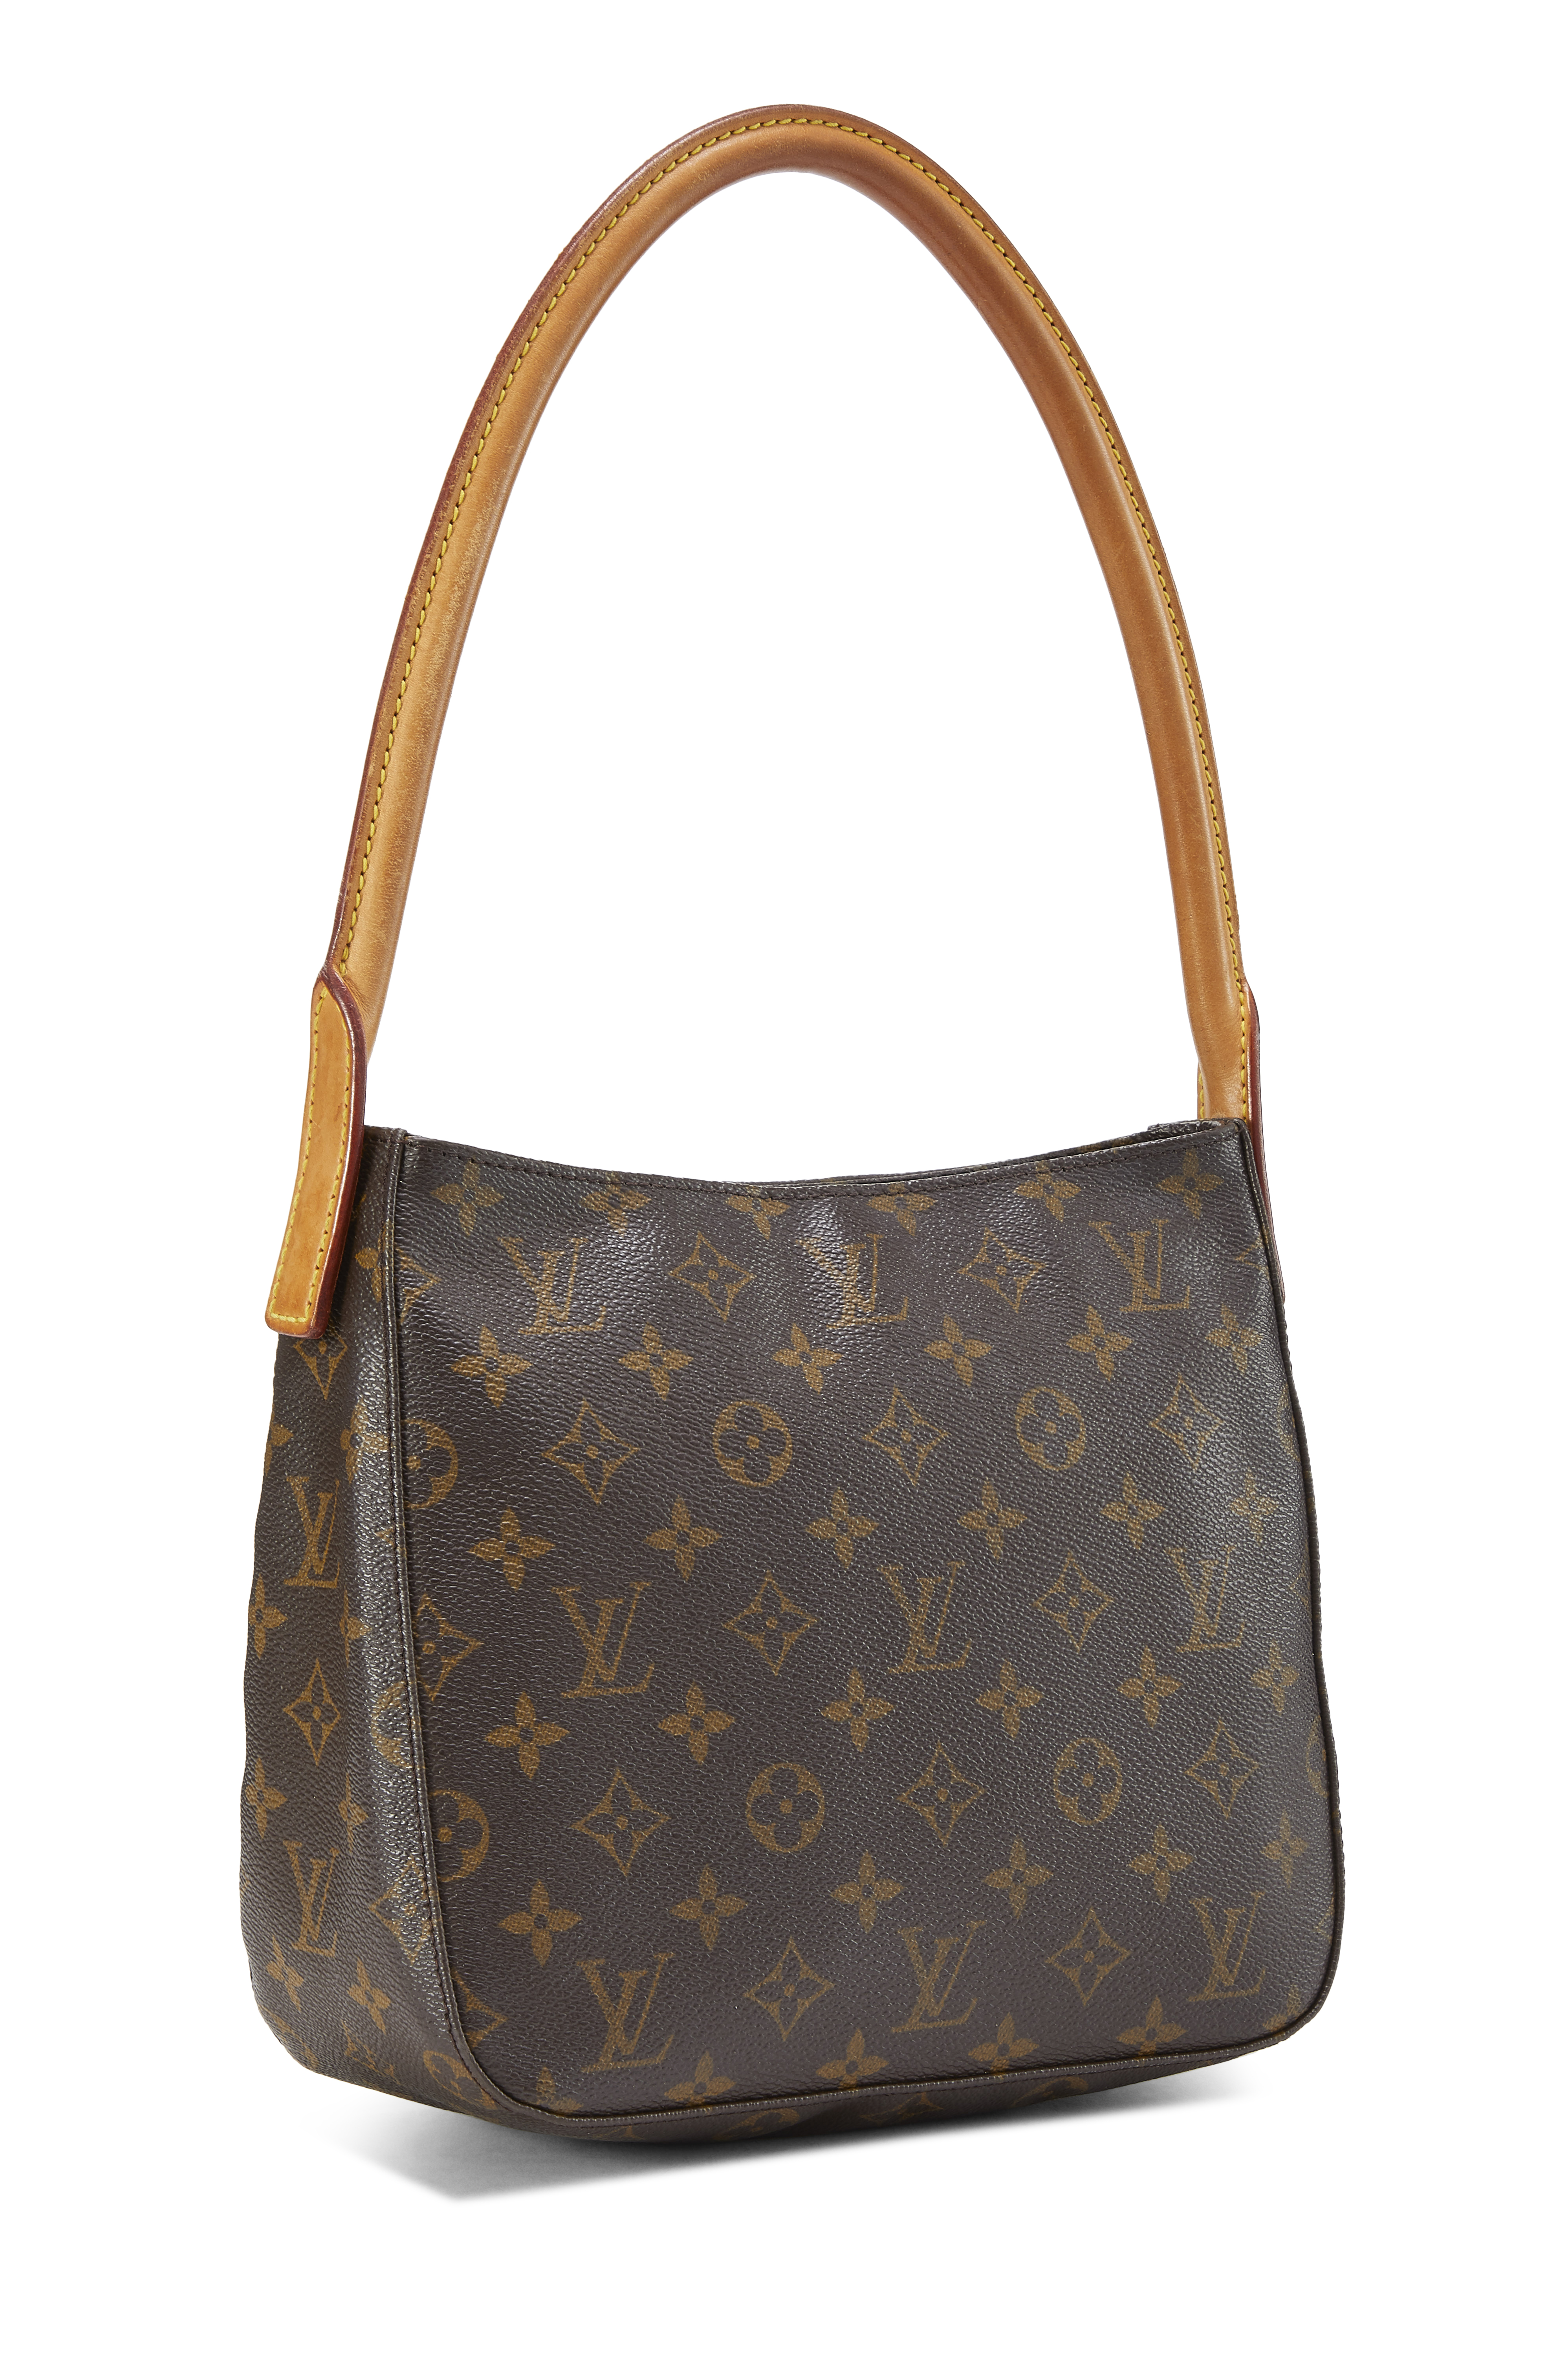 entusiastisk dejligt at møde dig linse Louis Vuitton Monogram Canvas Looping MM - What Goes Around Comes Around